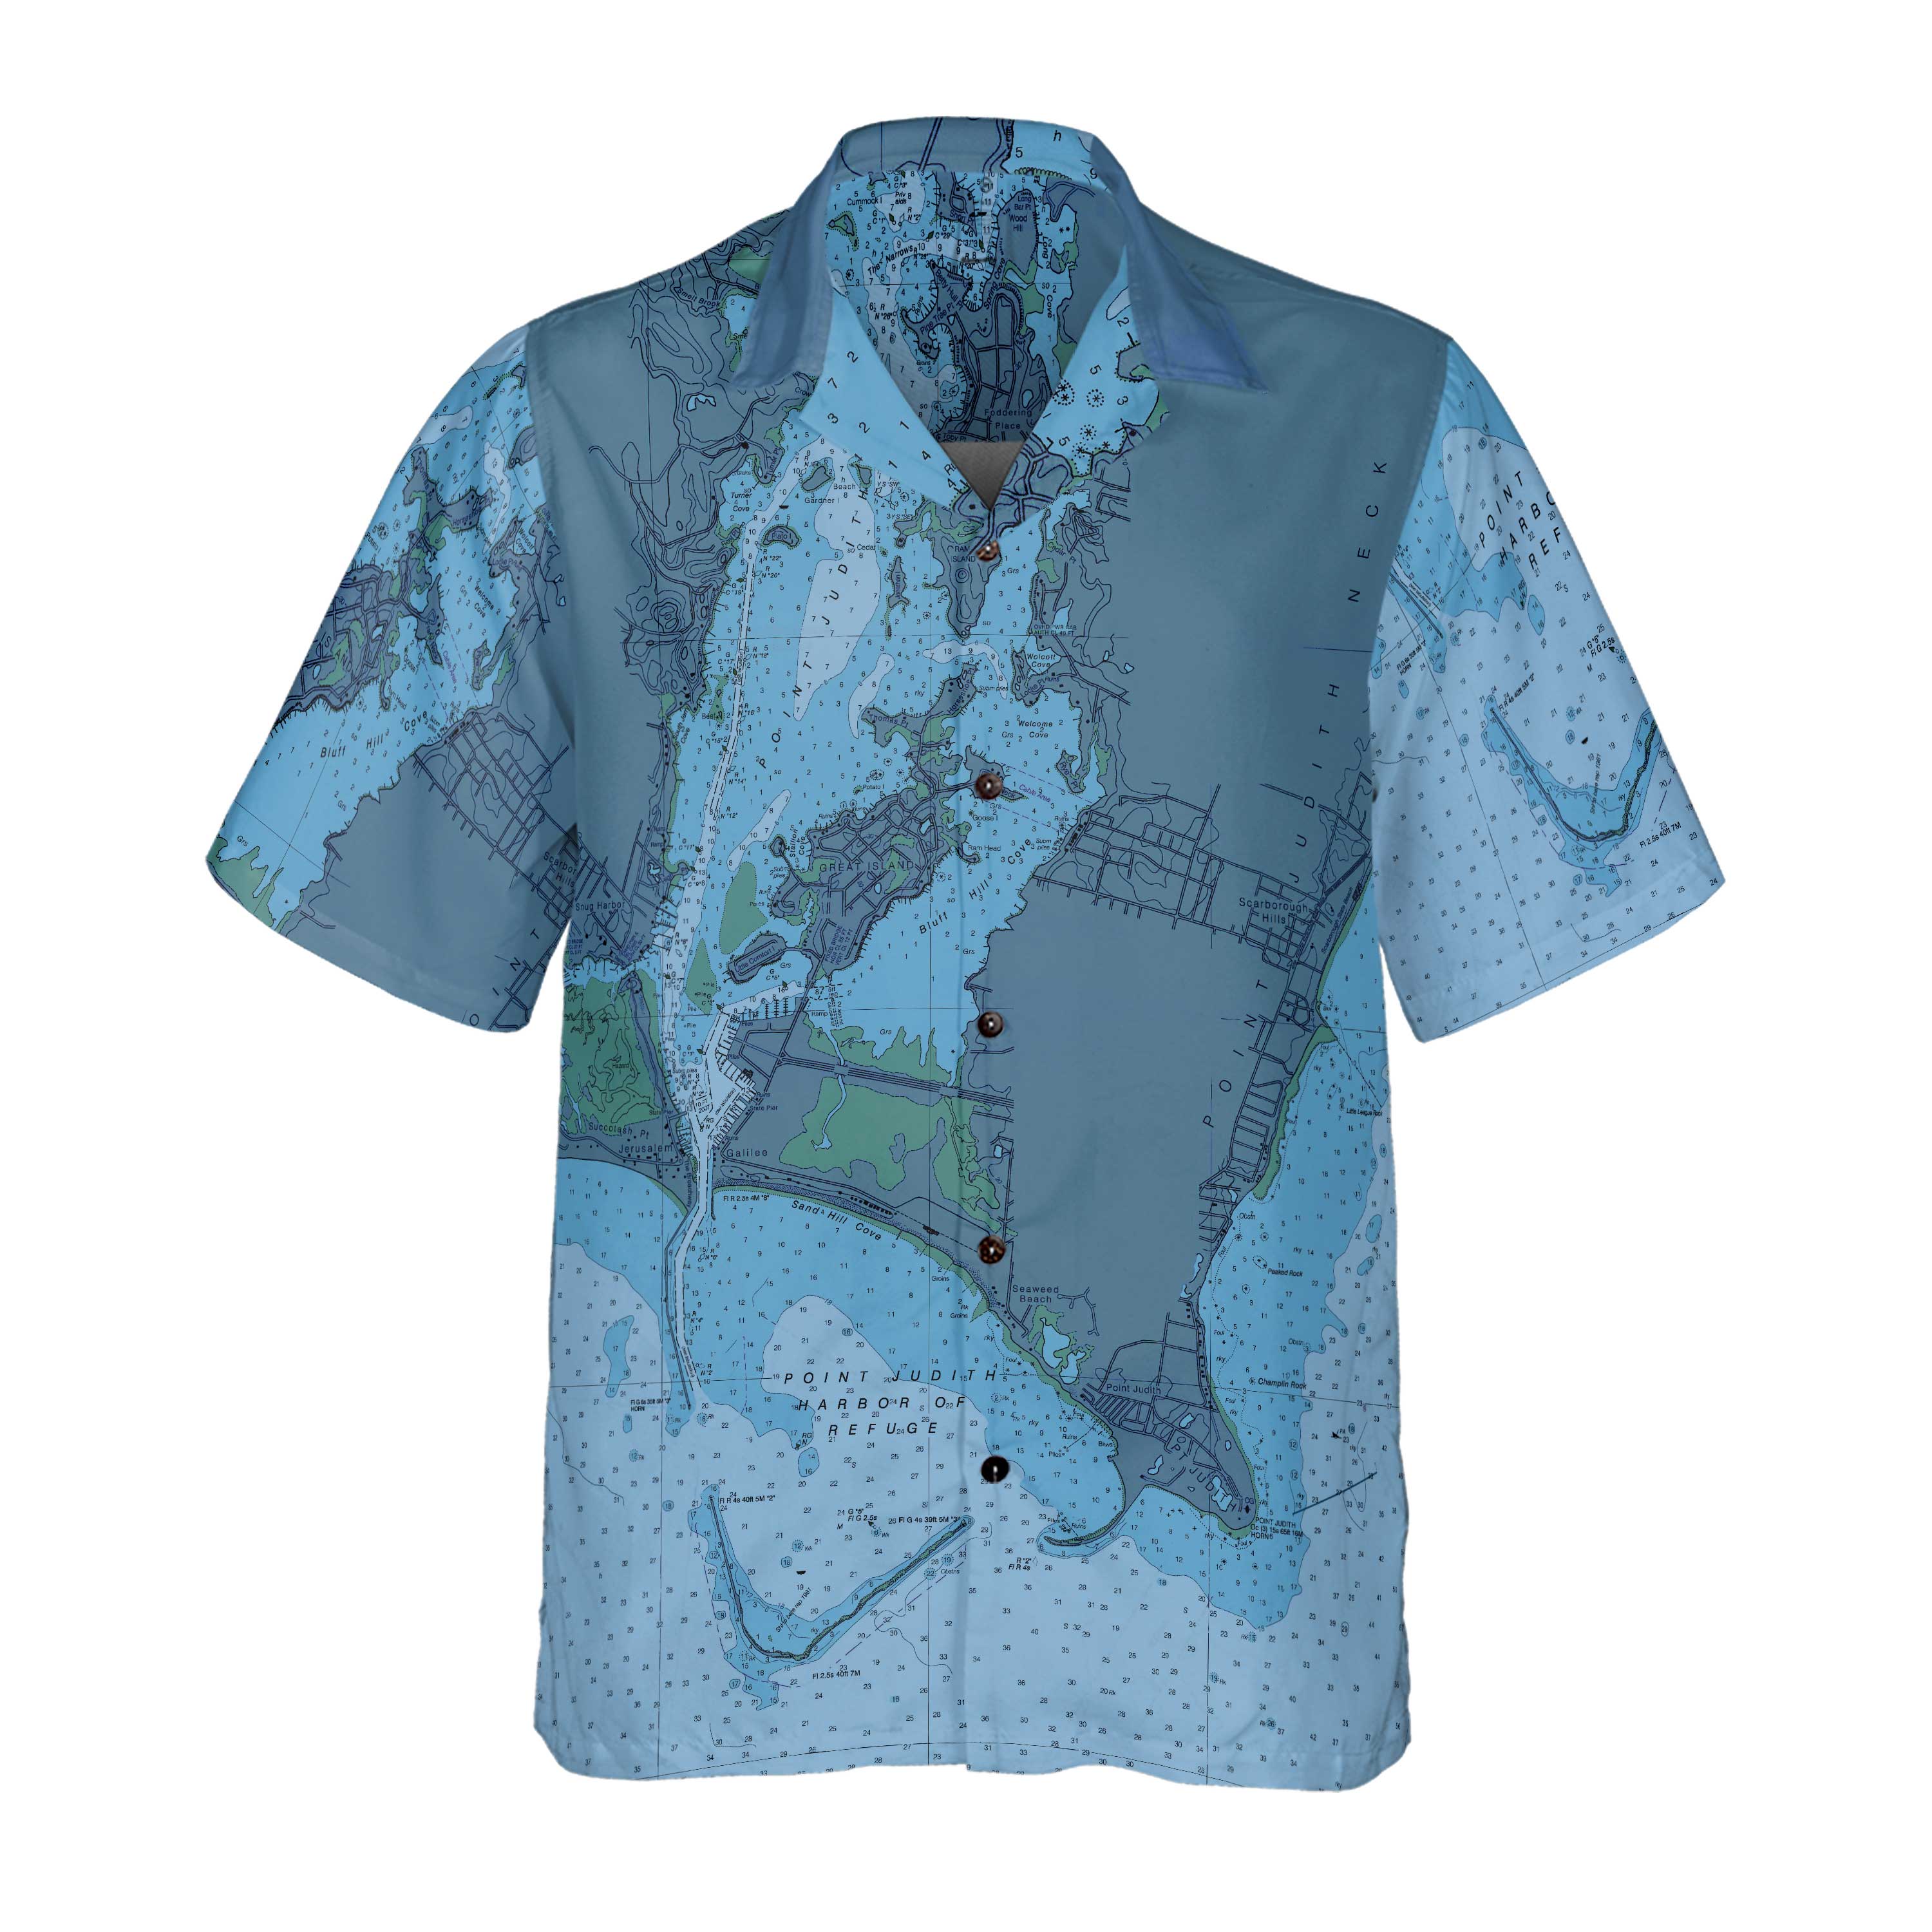 The Point Judith Blues Navigator Coconut Button Camp Shirt